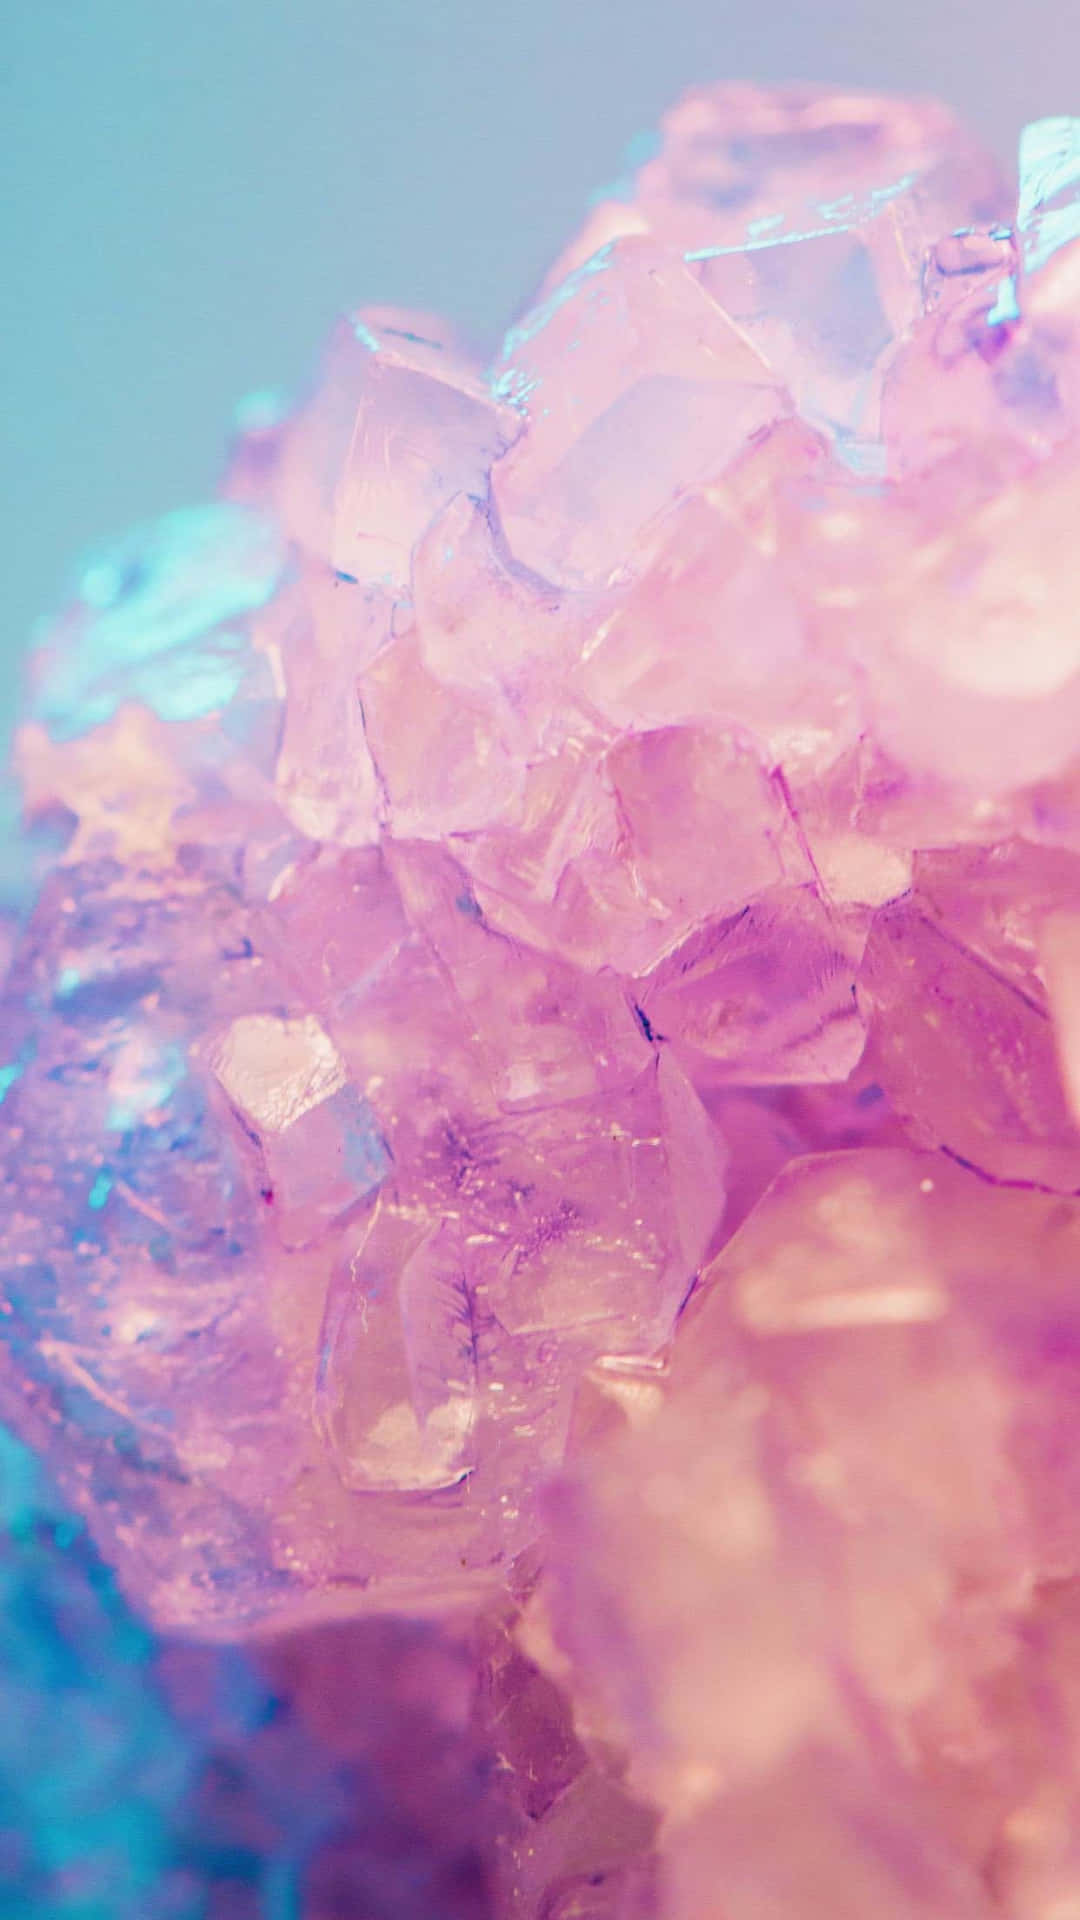 The beauty of a sparkling aesthetic crystal. Wallpaper